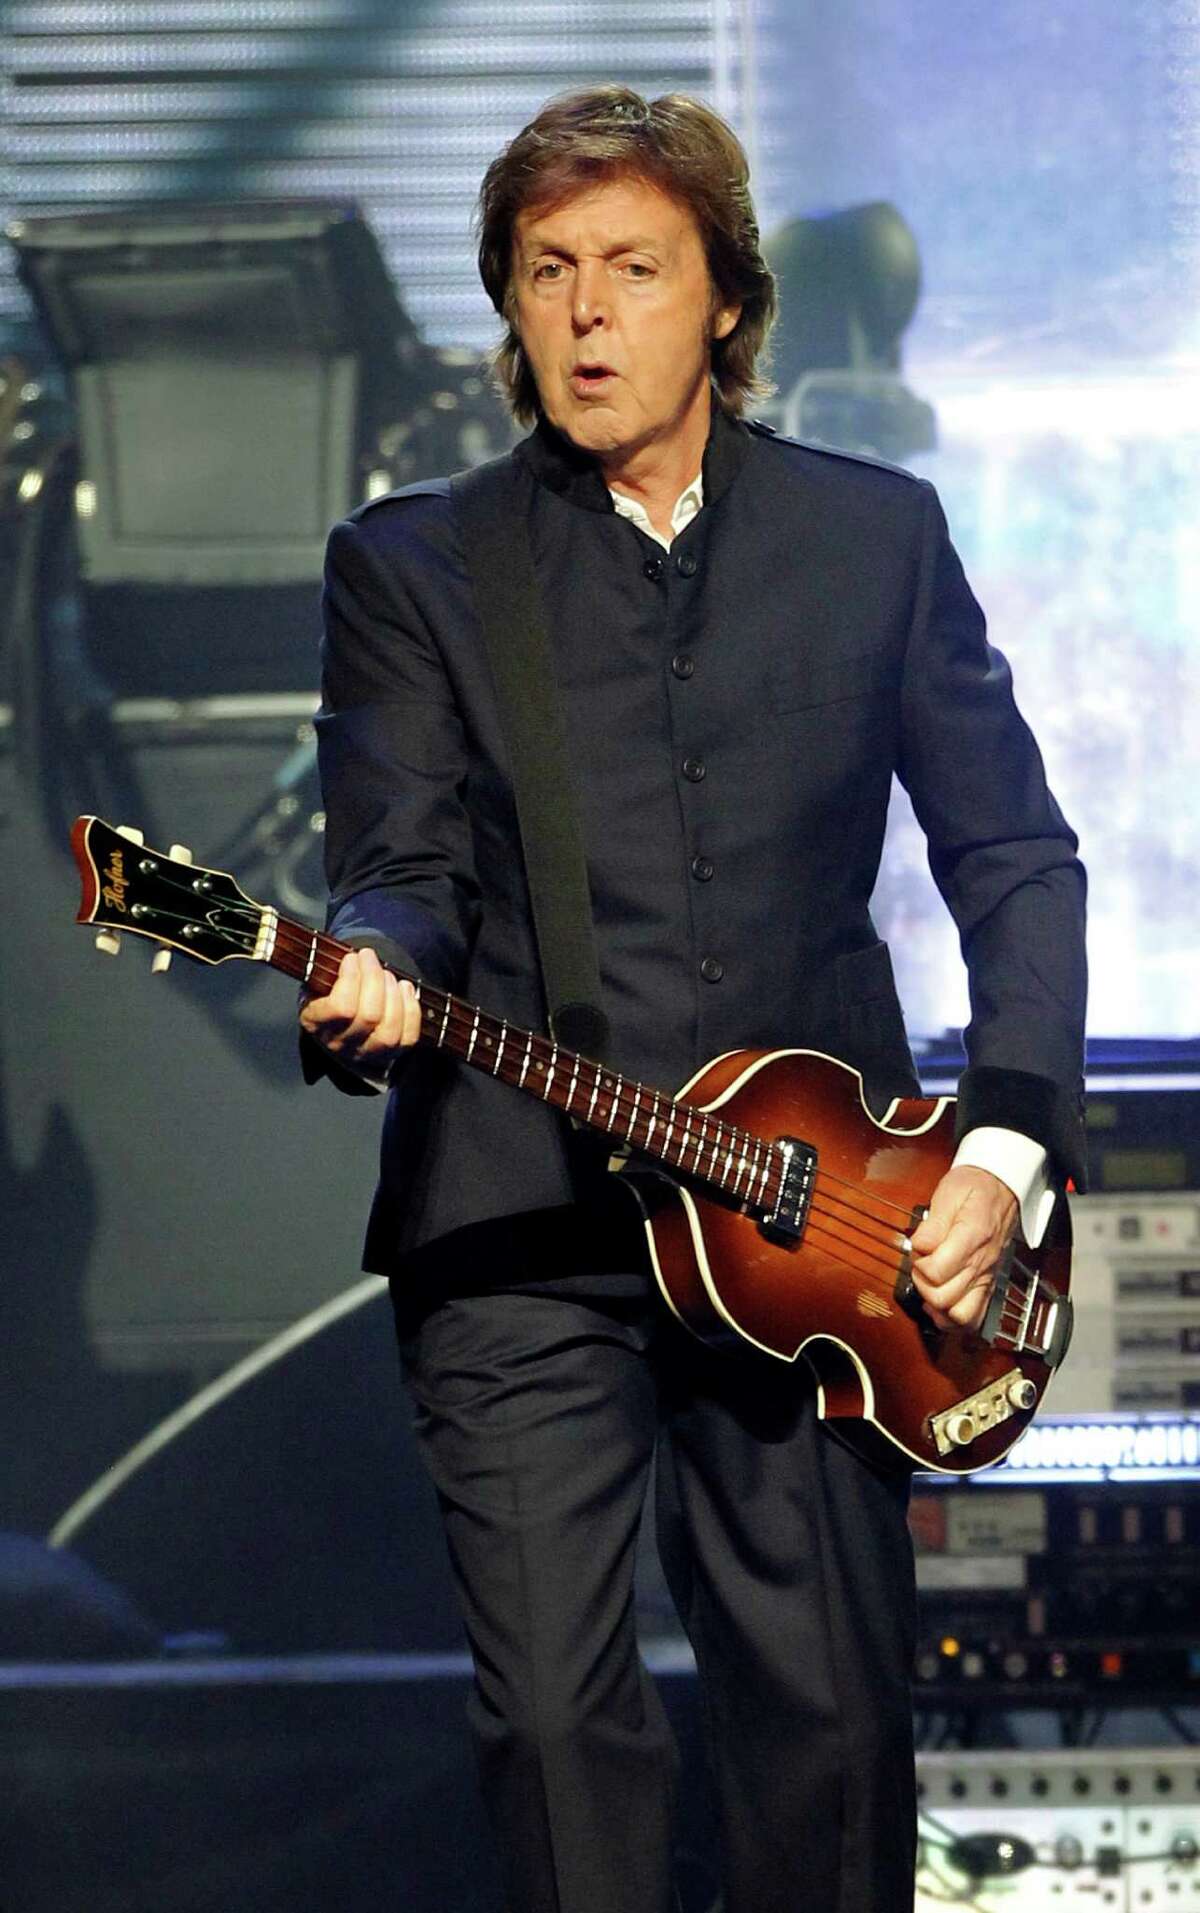 Paul McCartney will have an opportunity to play for old fans and all the kids who Tweeted "who's the old guy?" at the Grammys earlier this year. He'll likely mix up lots of Beatles favorites with some Wings and solo material, including some of the old standards from his latest "Kisses on the Bottom." He's at Minute Maid Park on Nov. 14.